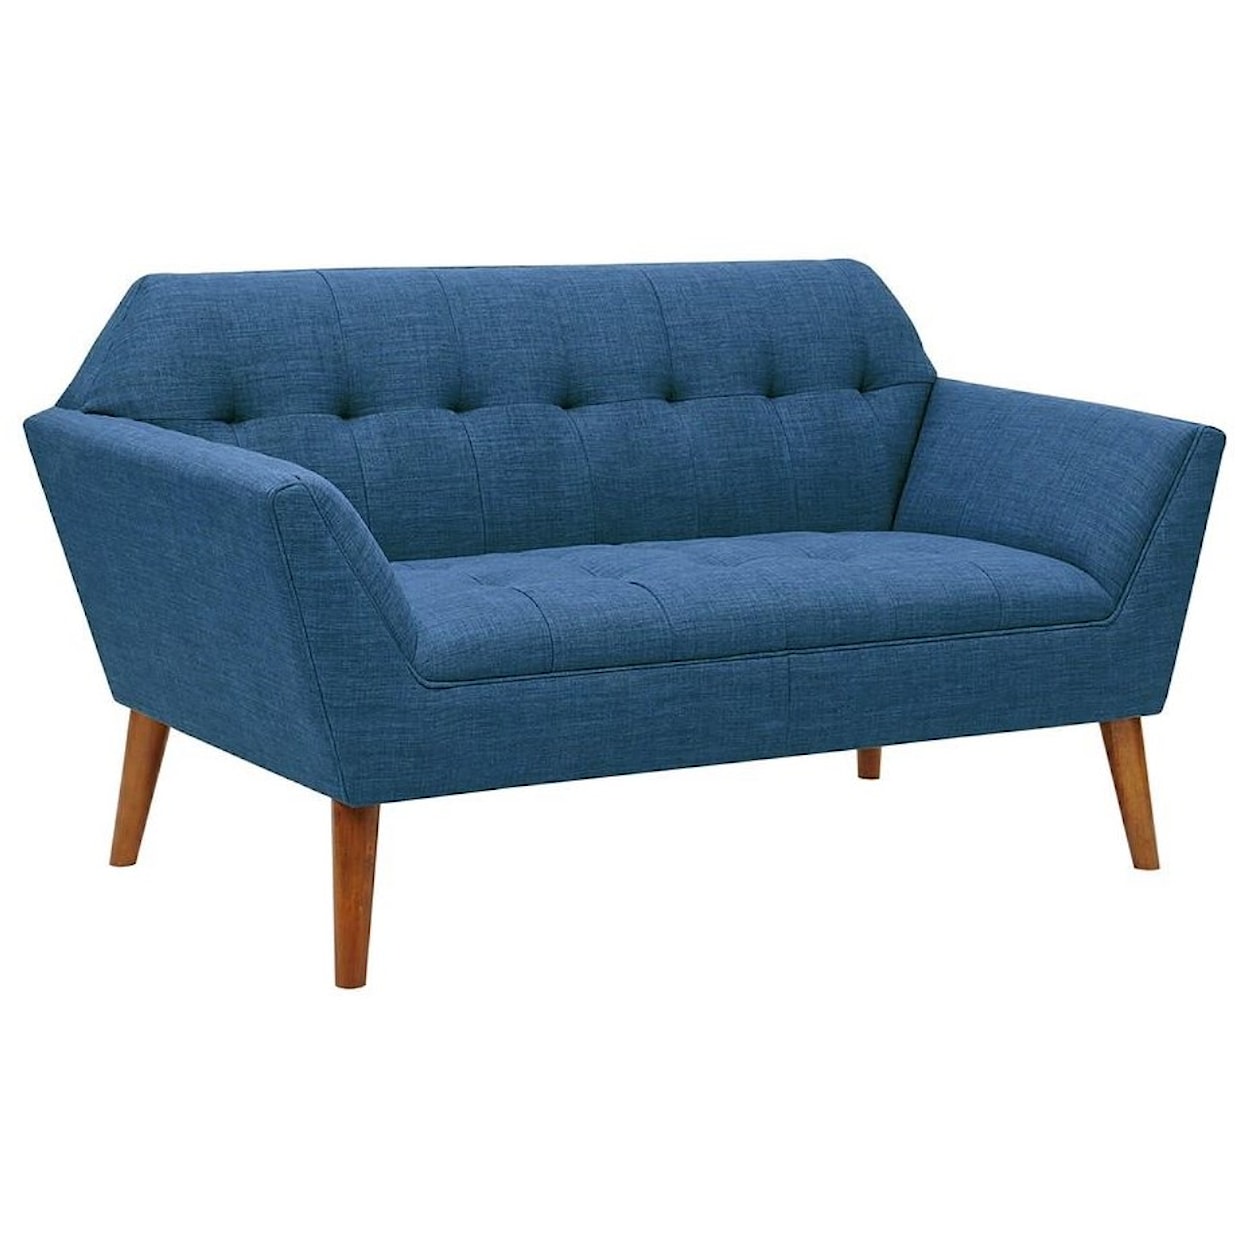 JLA Home Home Accents Loveseat